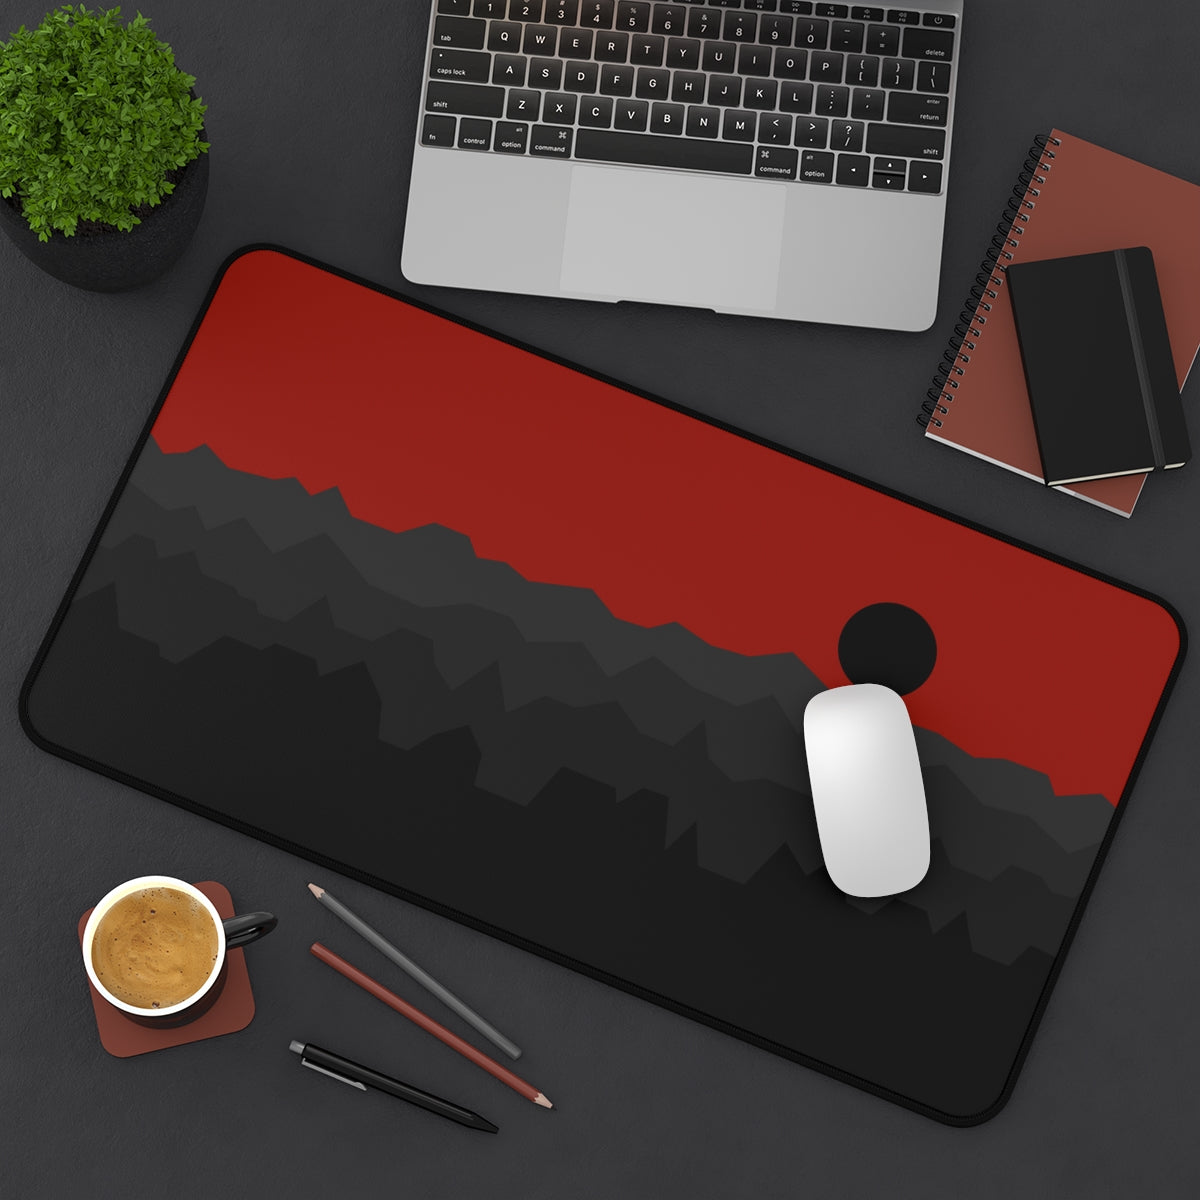 Black & Red Abstract Mountains Desk Mat - Desk Cookies